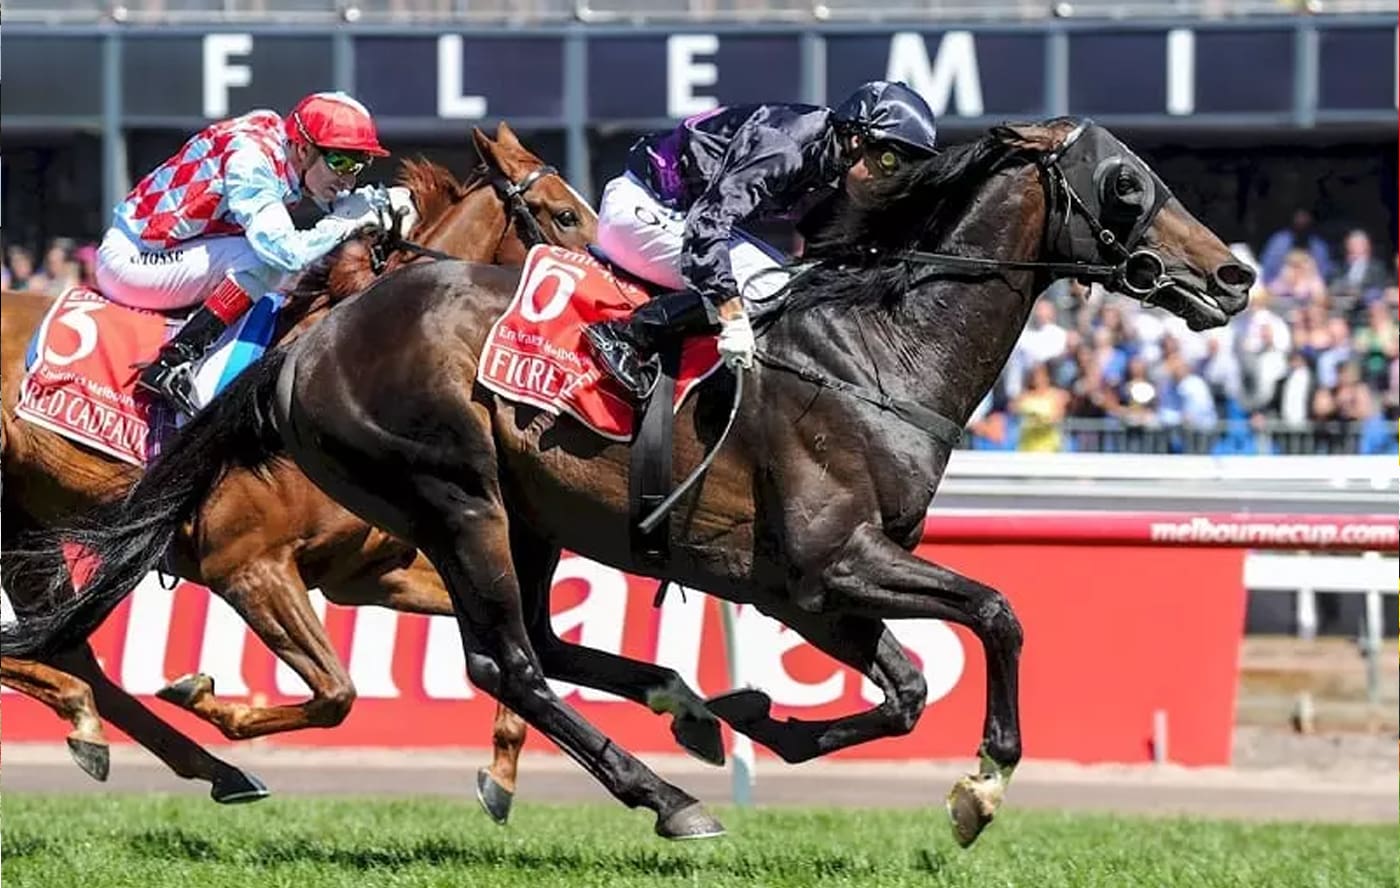 Who won the 2013 Melbourne Cup?